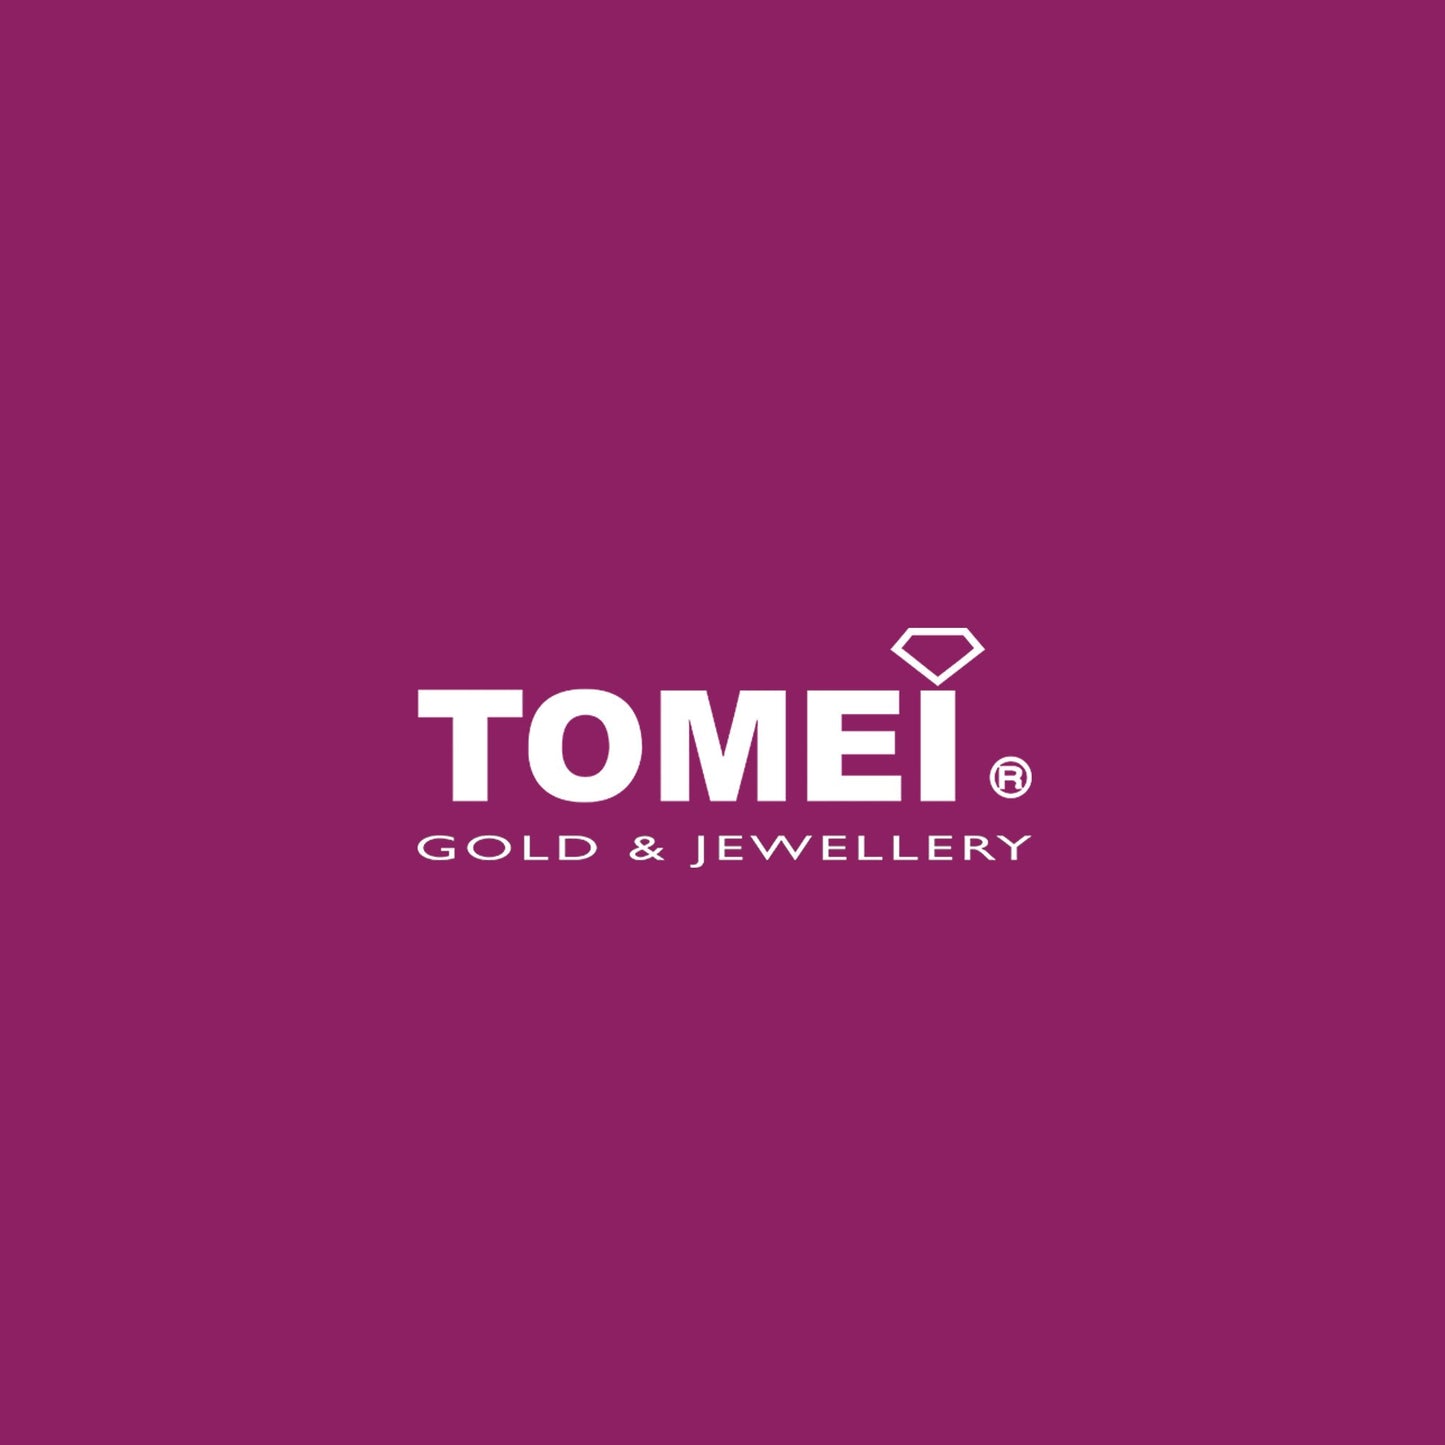 TOMEI Ellipse Abacus Pendant, Yellow Gold 916